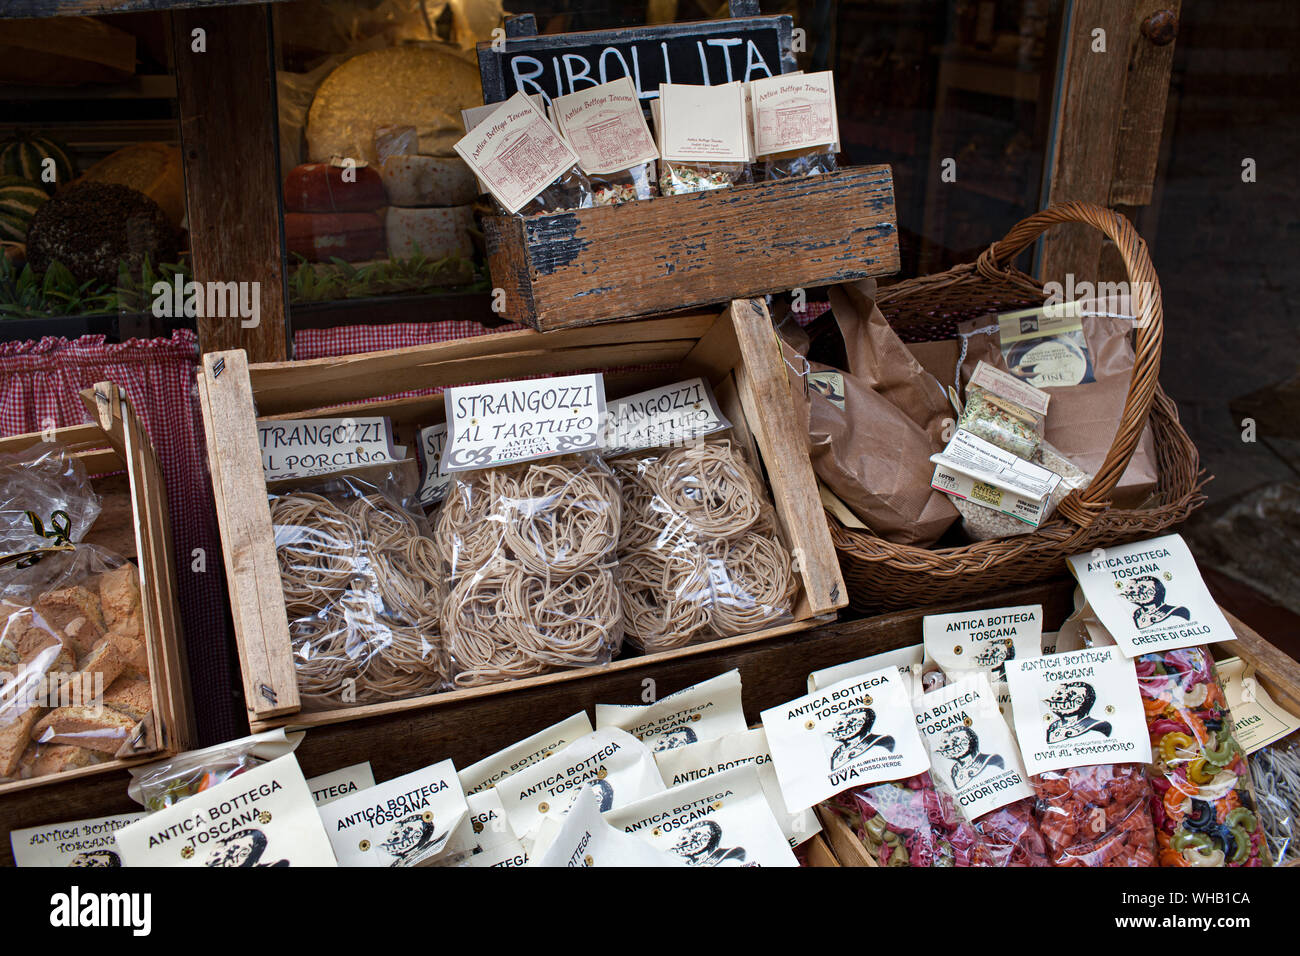 AREZZO, TUSCANY, ITALY - JANUARY 10, 2016: Typical Italian products displayed on the storefront of Antica Bottega Toscana one of the oldest shops Stock Photo